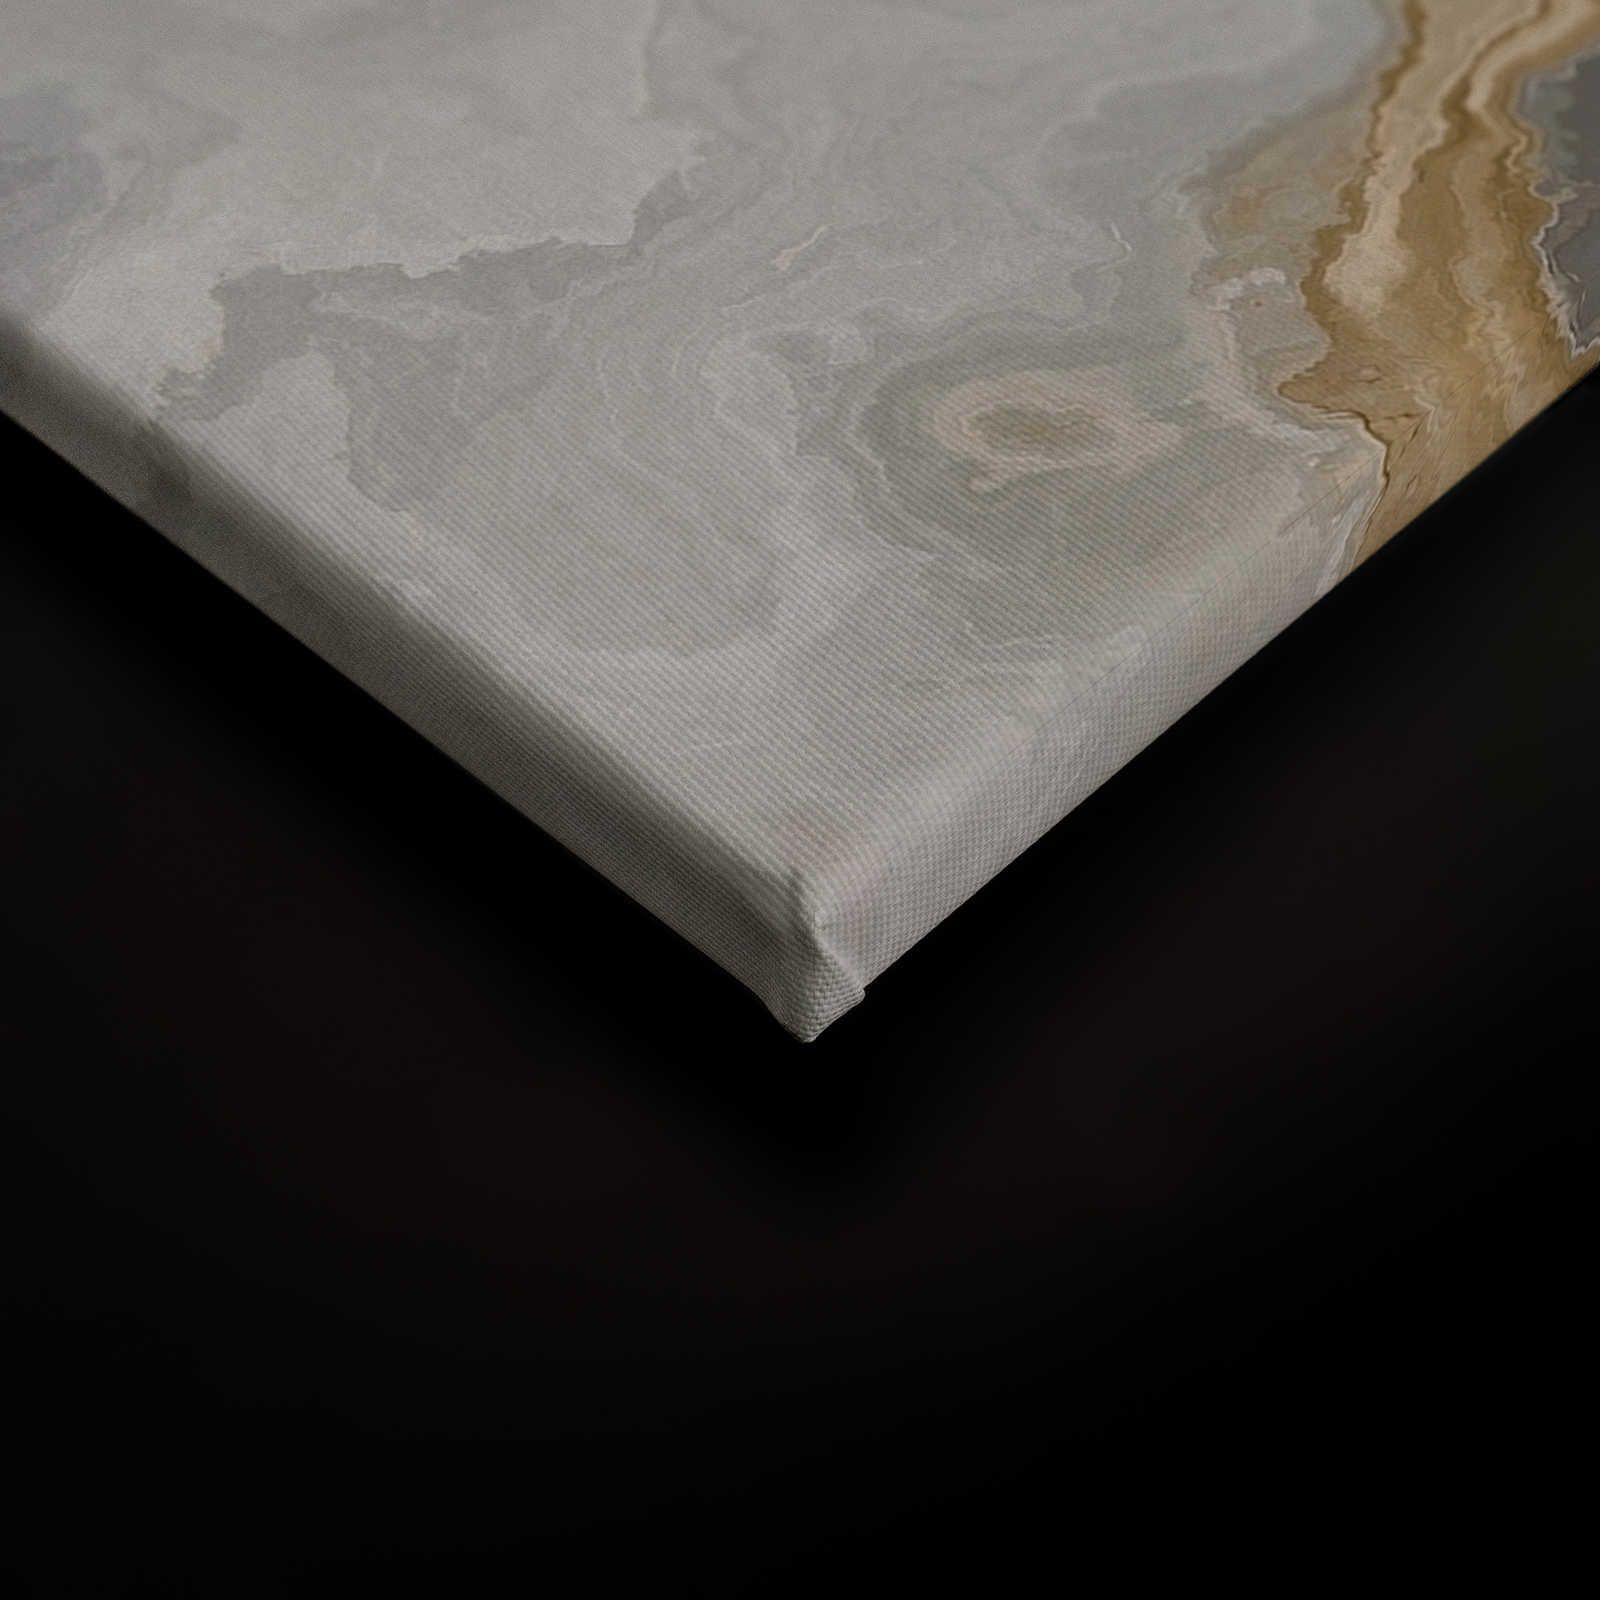             Canvas painting stone look quartz with marbling - 0,90 m x 0,60 m
        